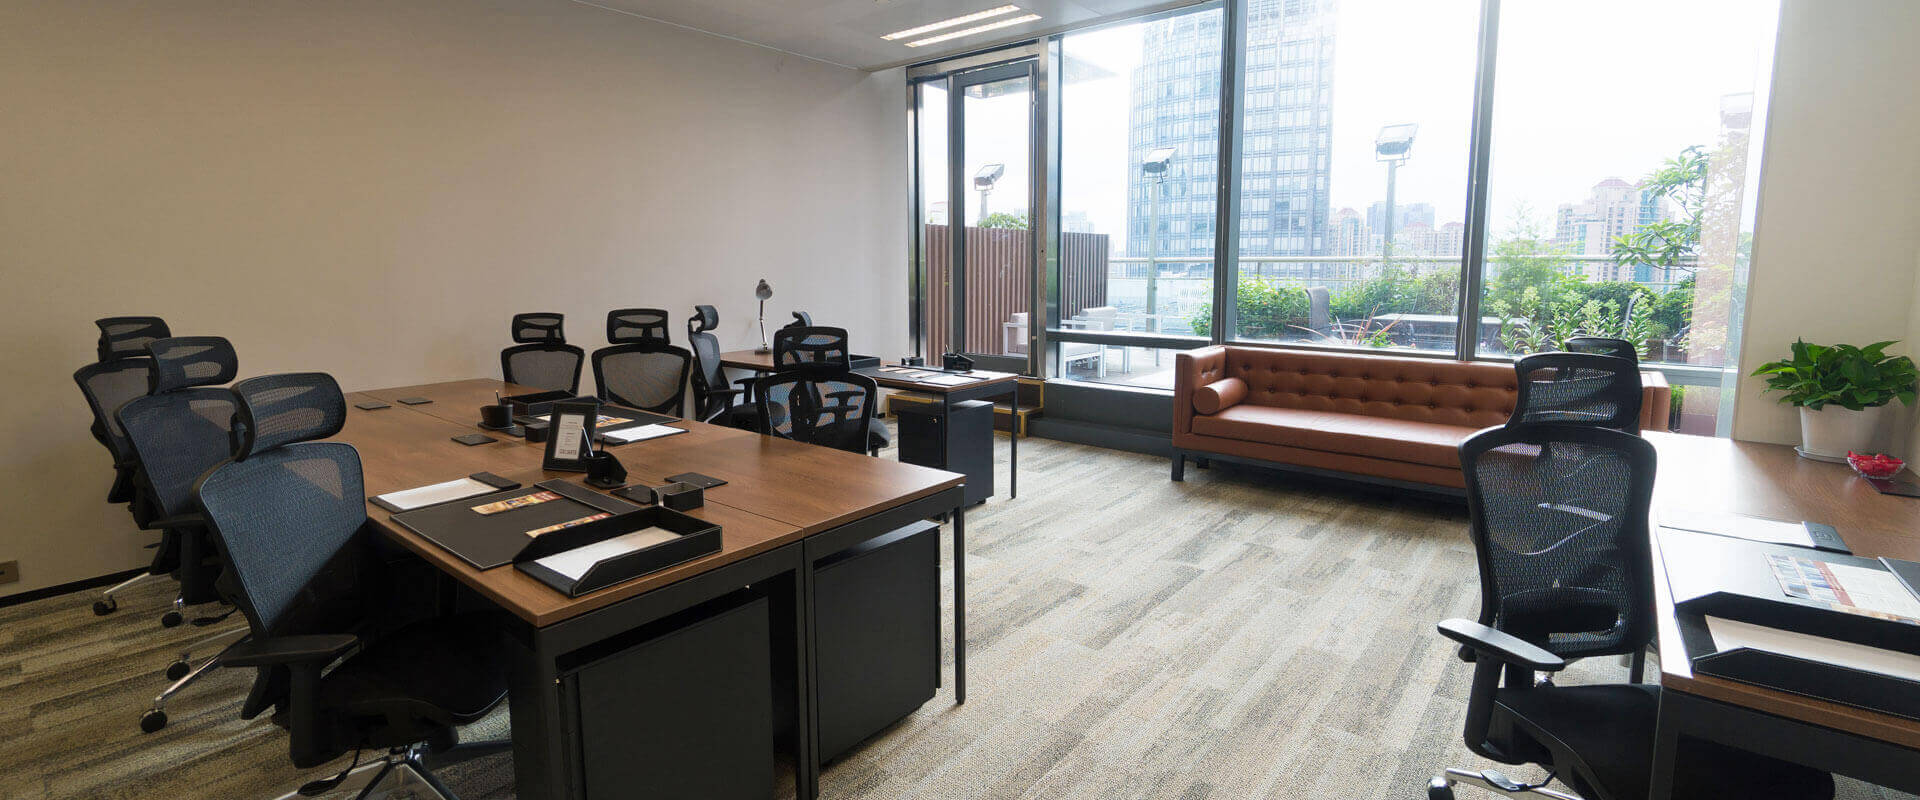 Shanghai - Serviced Offices, Virtual Office, Coworking, Meeting Rooms